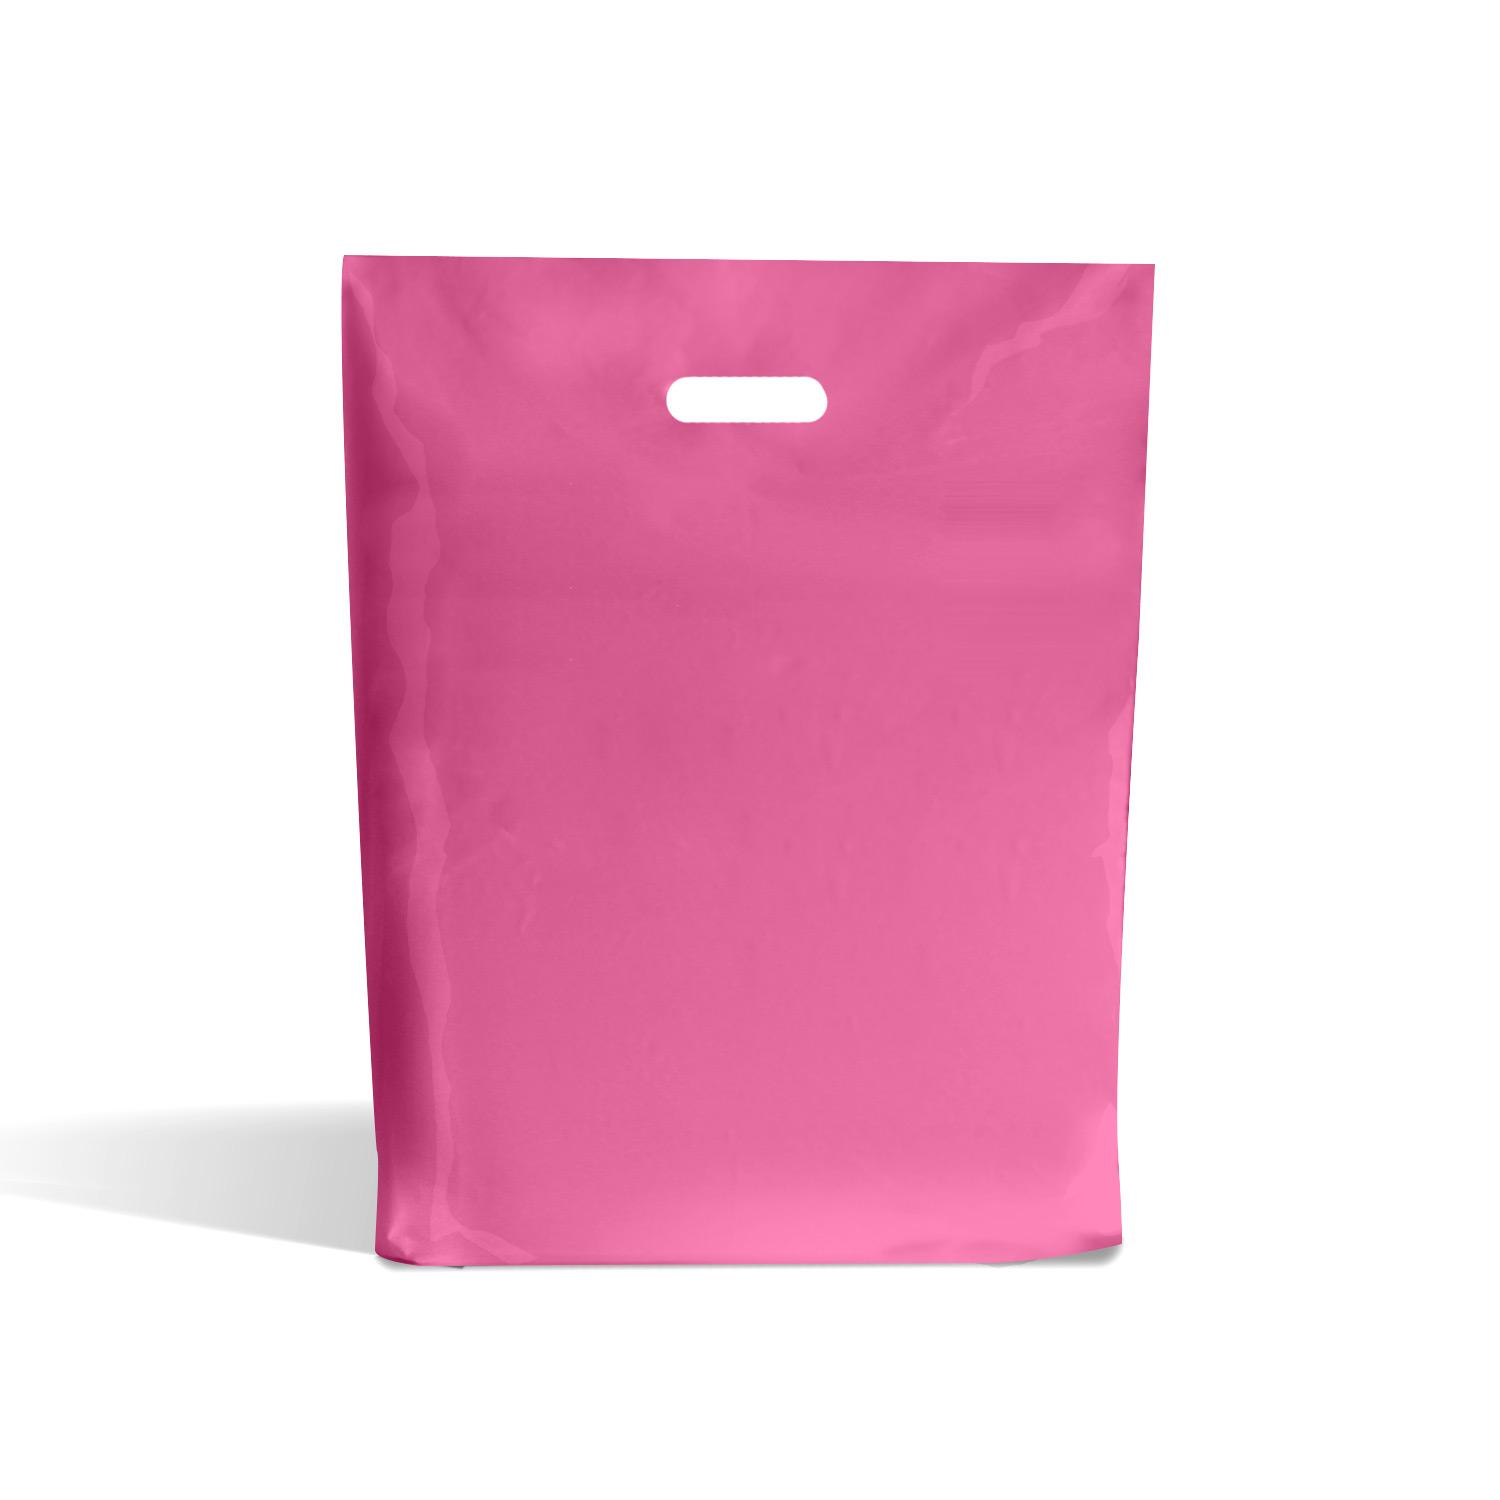 Shocking Pink Biodegradable Plastic Carrier Bags